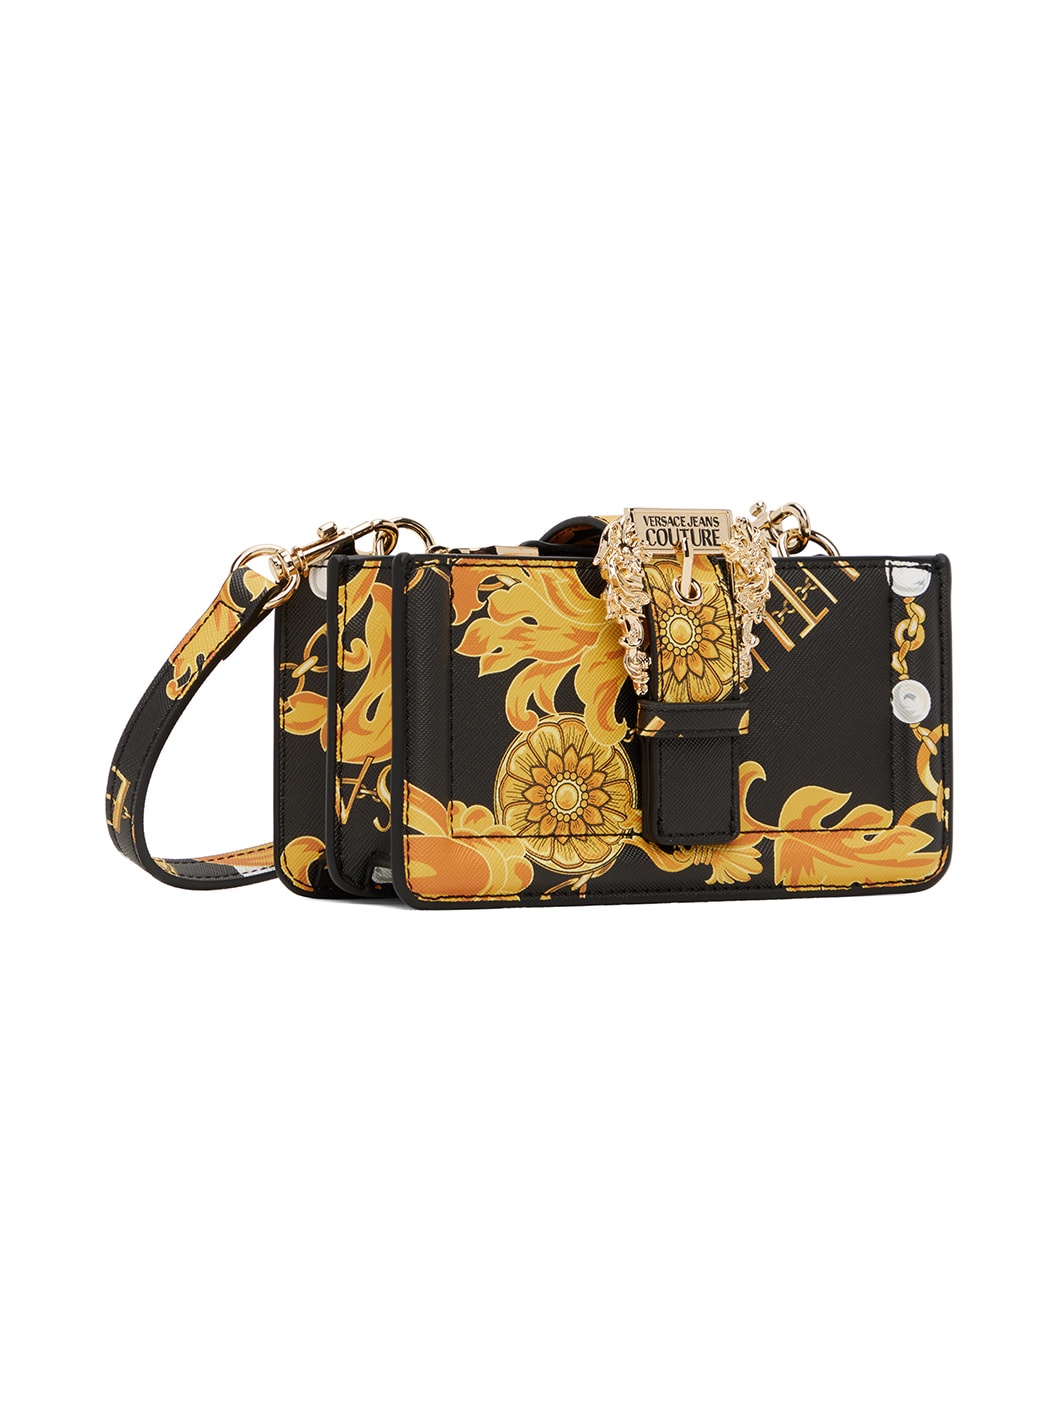 Black & Gold Couture 01 Bag - 2